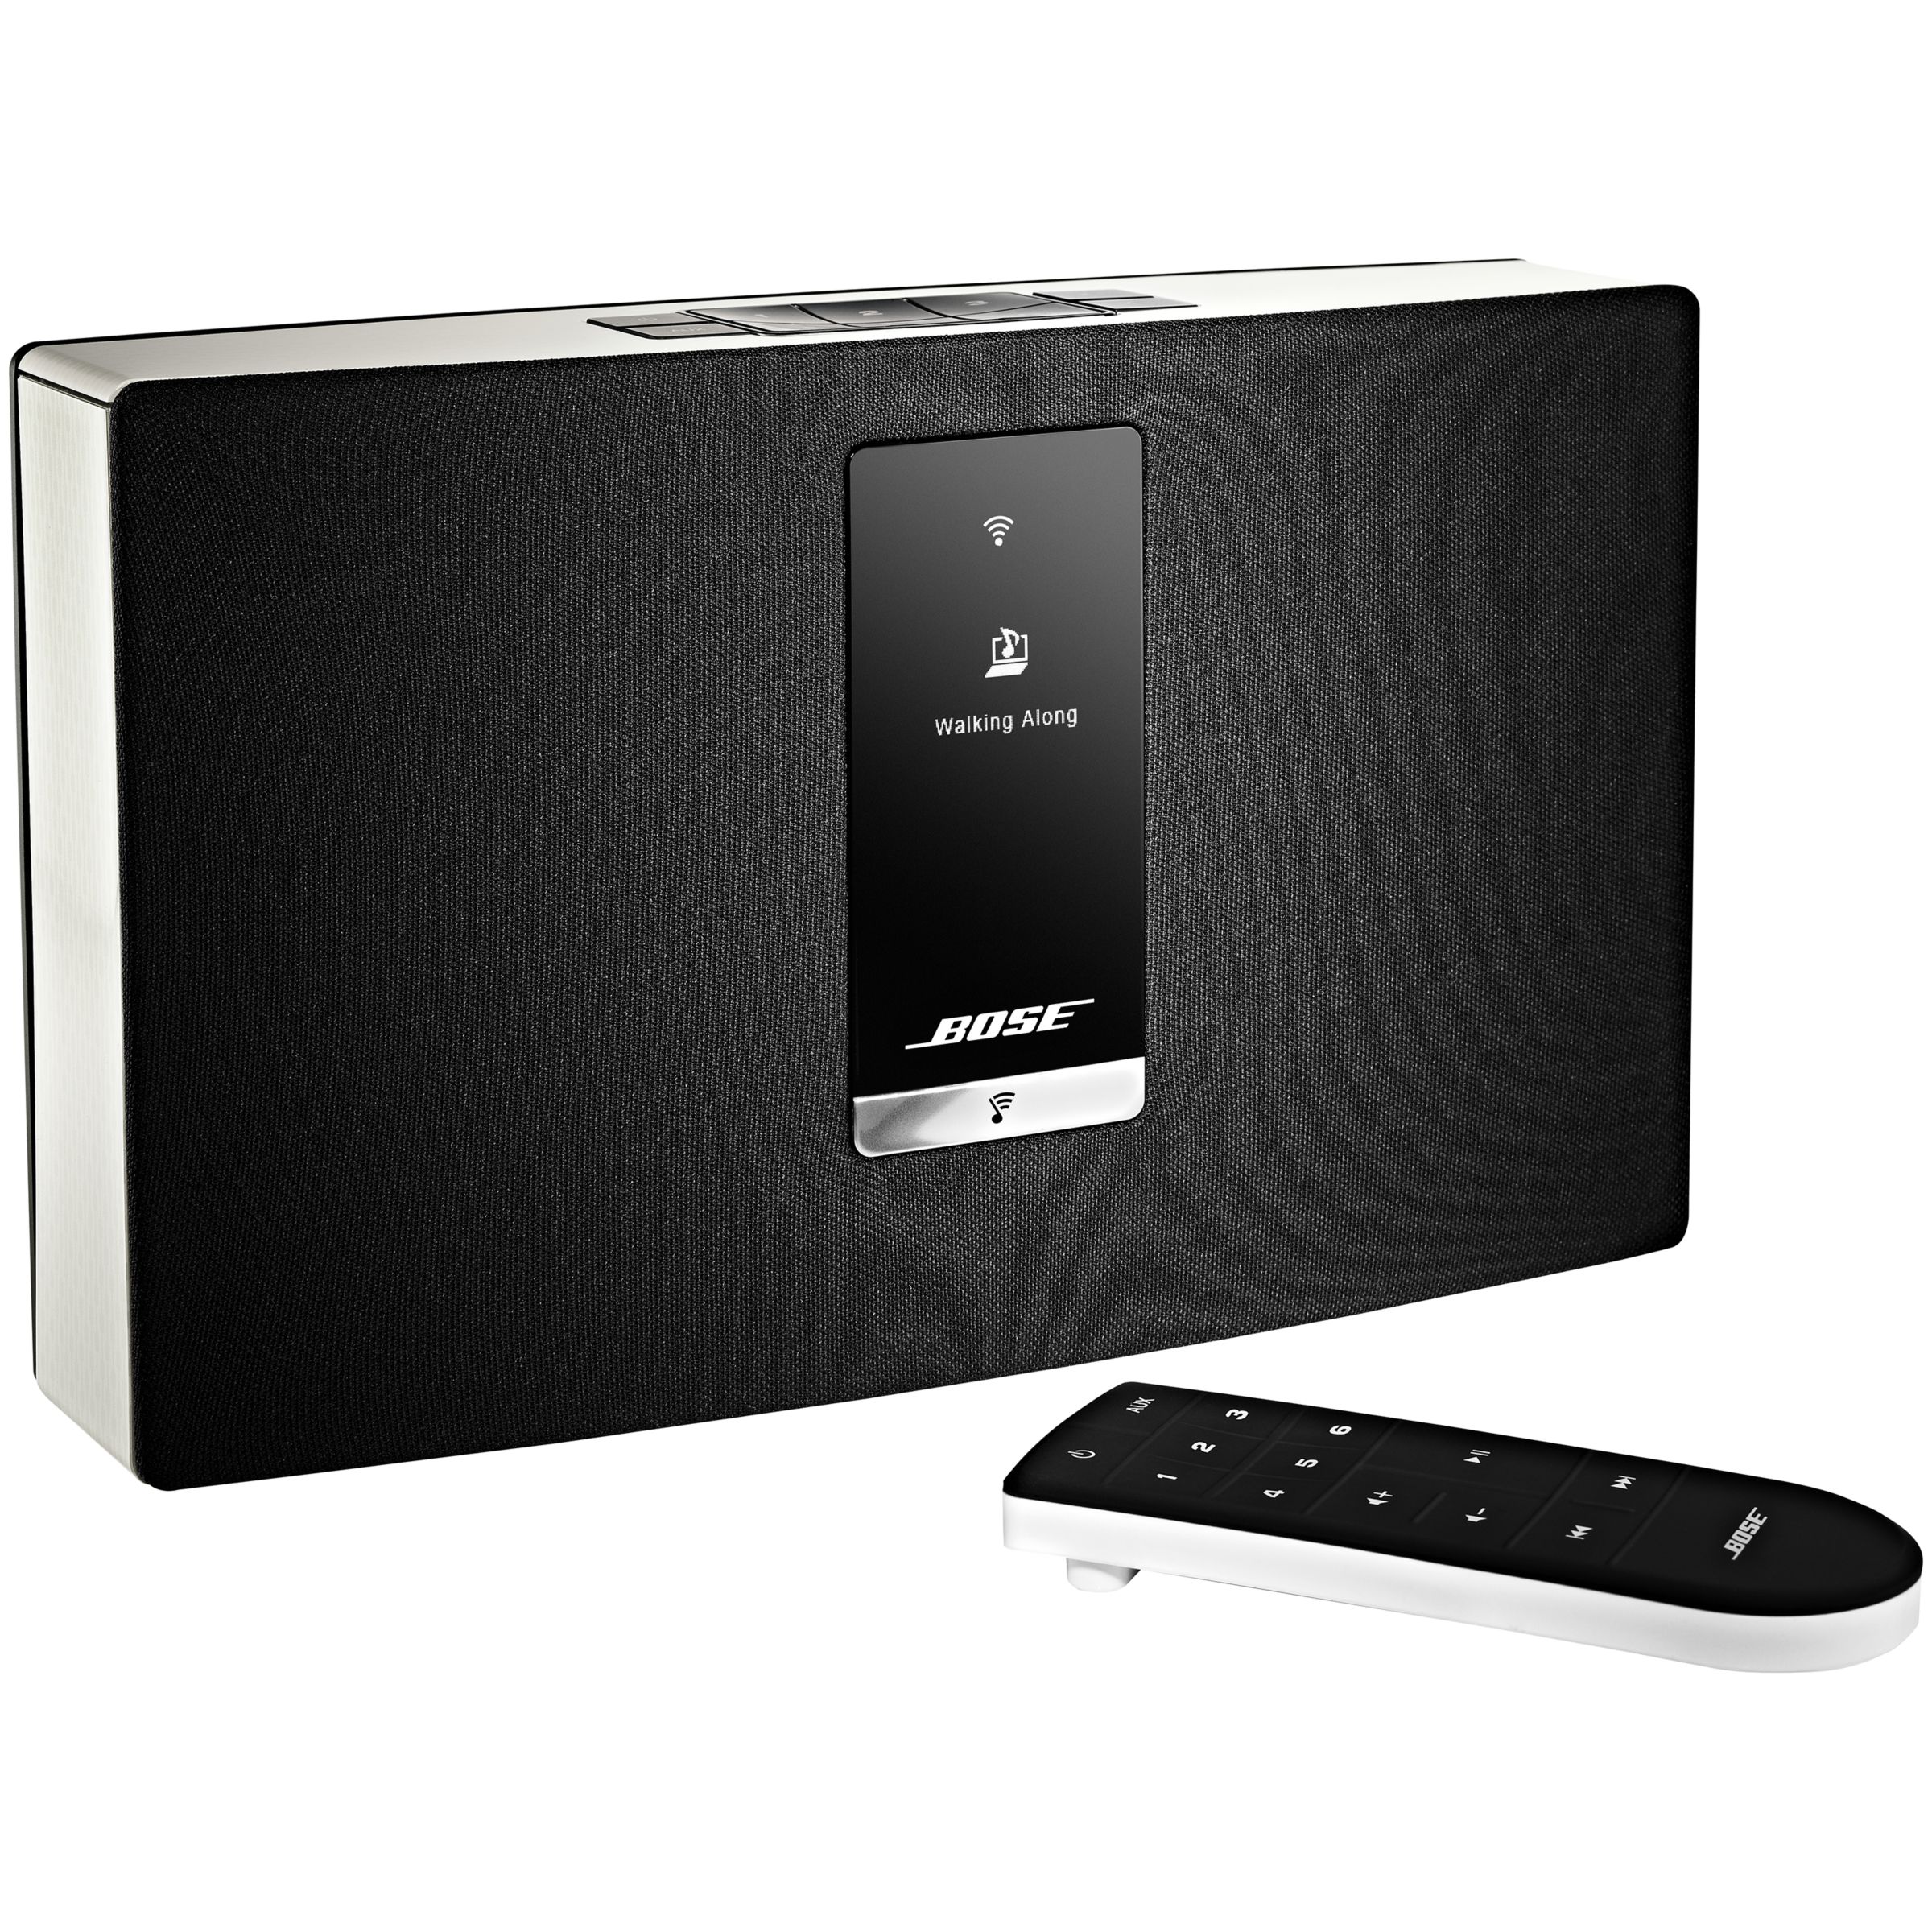 soundtouch 300 airplay